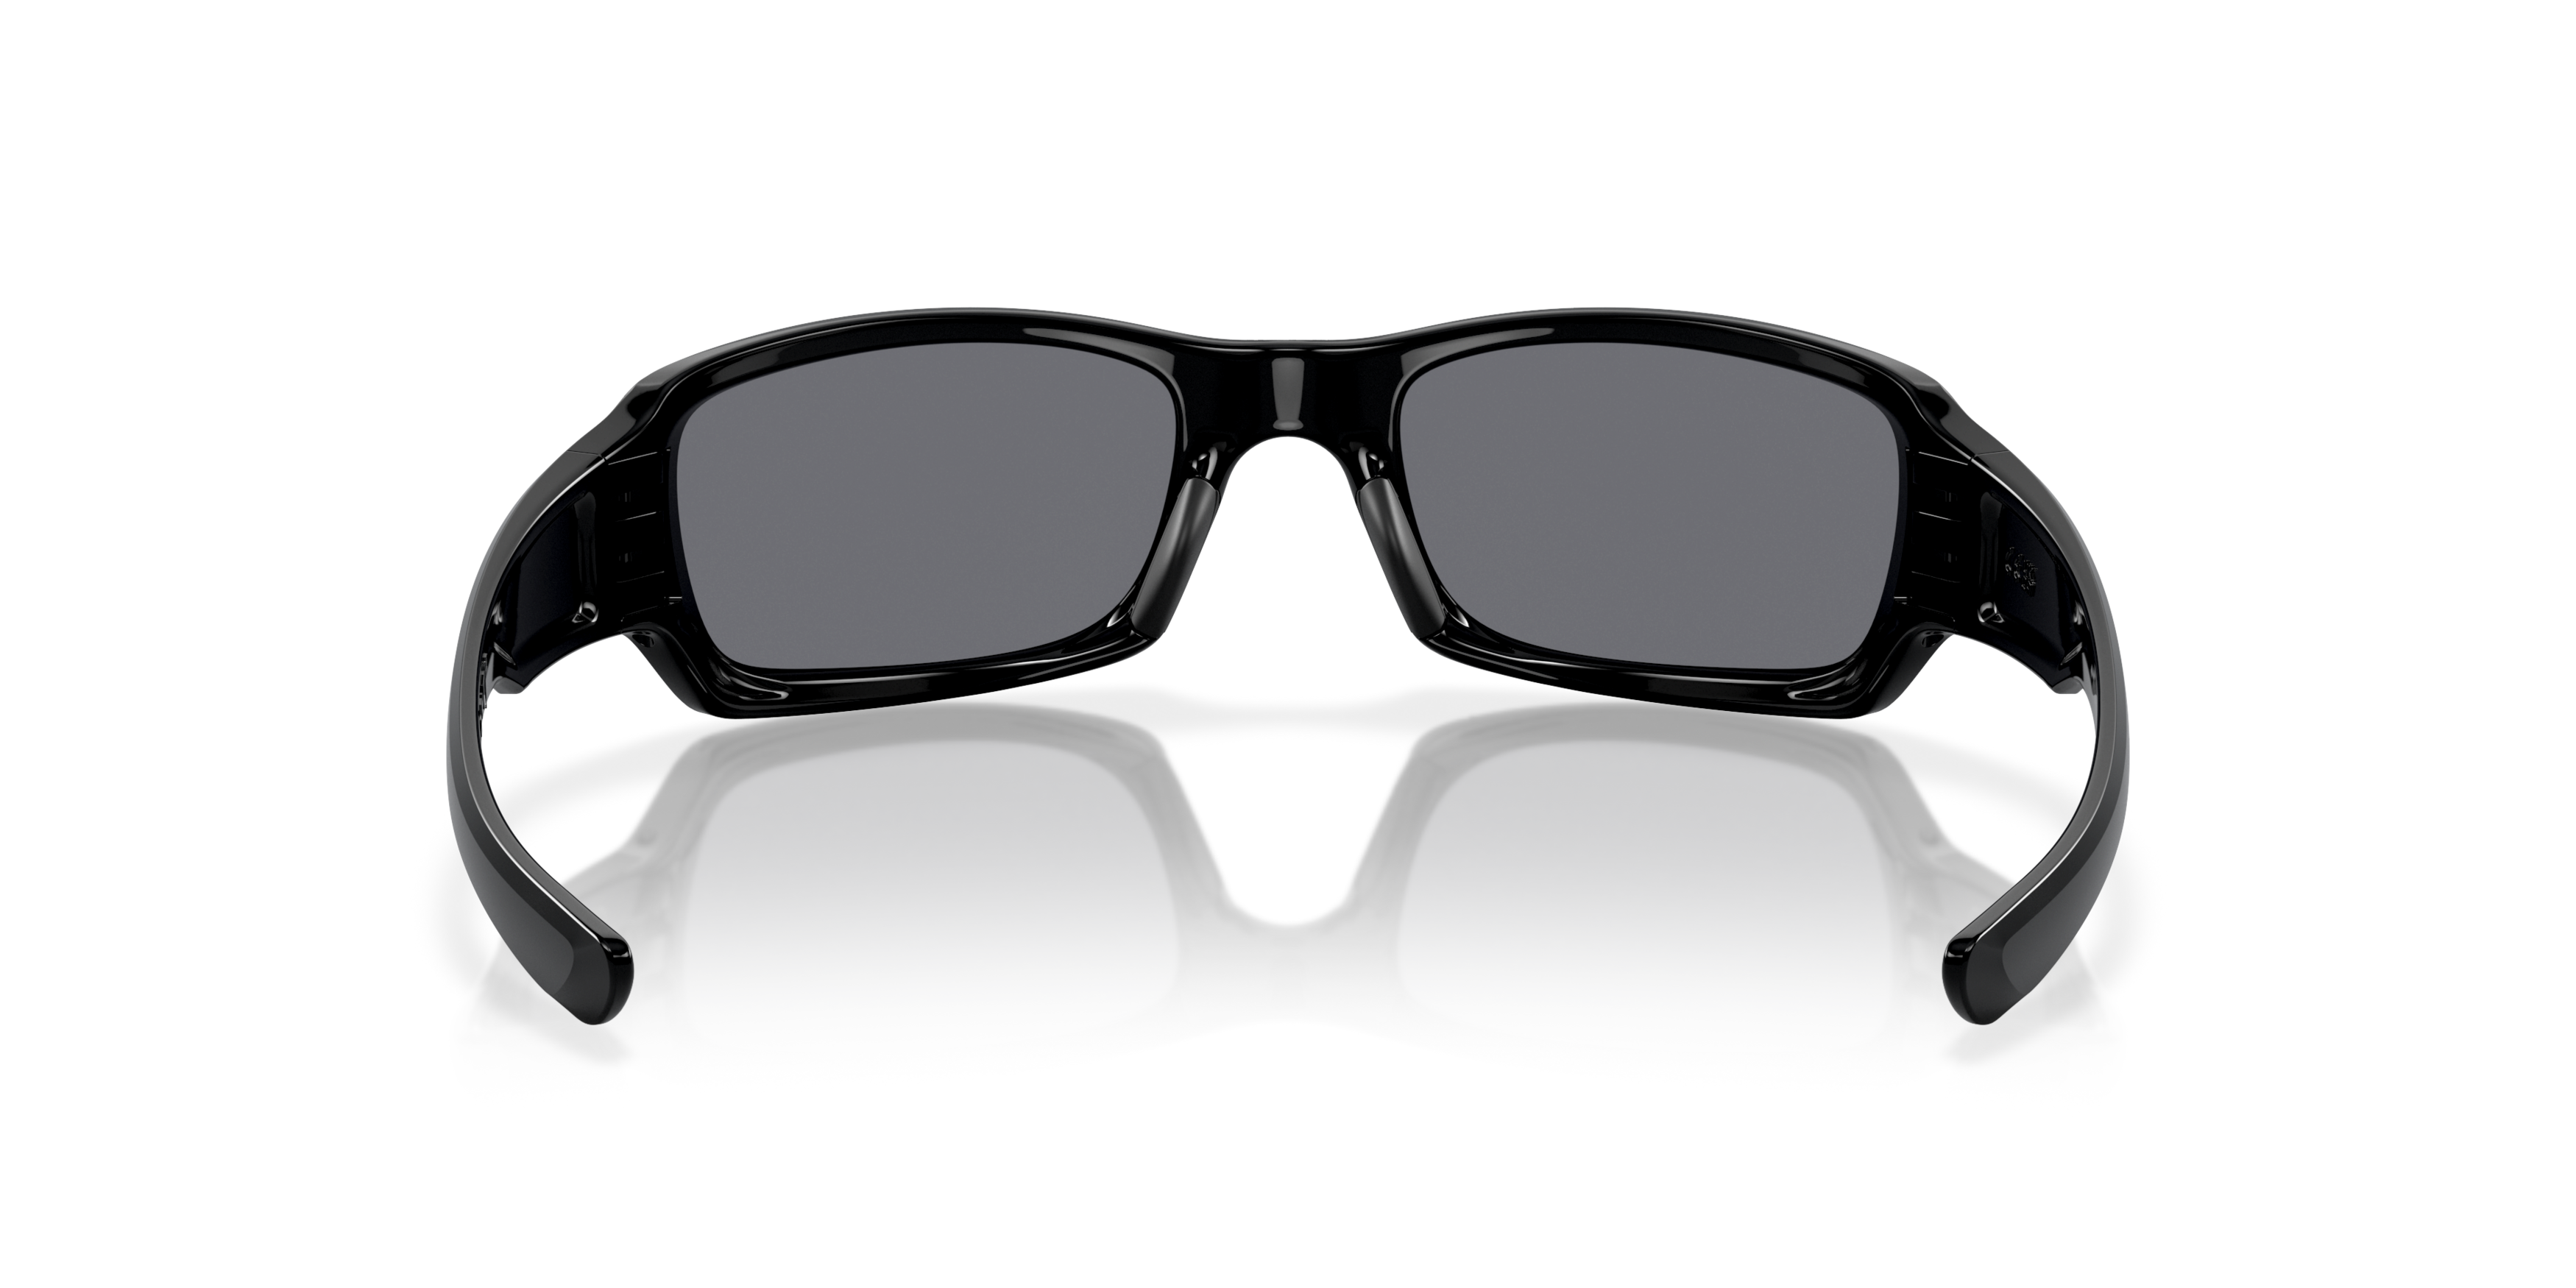 [products.image.detail02] Oakley FIVES SQUARED OO9238 923804